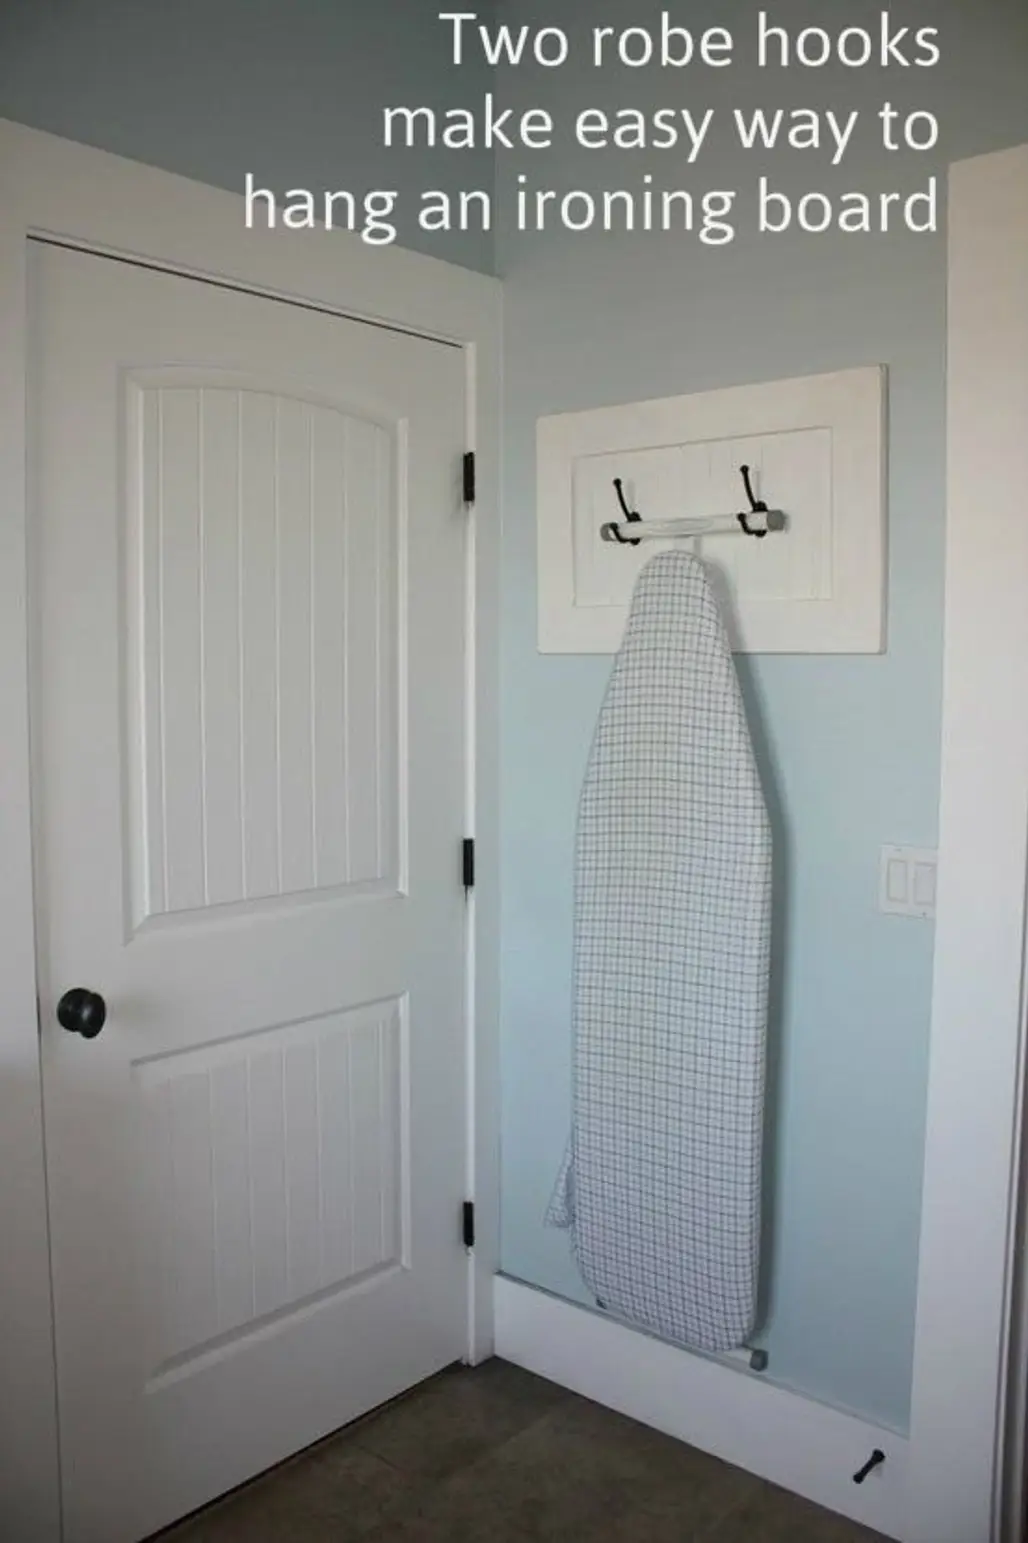 Use Coat Hooks to Hang an Ironing Board